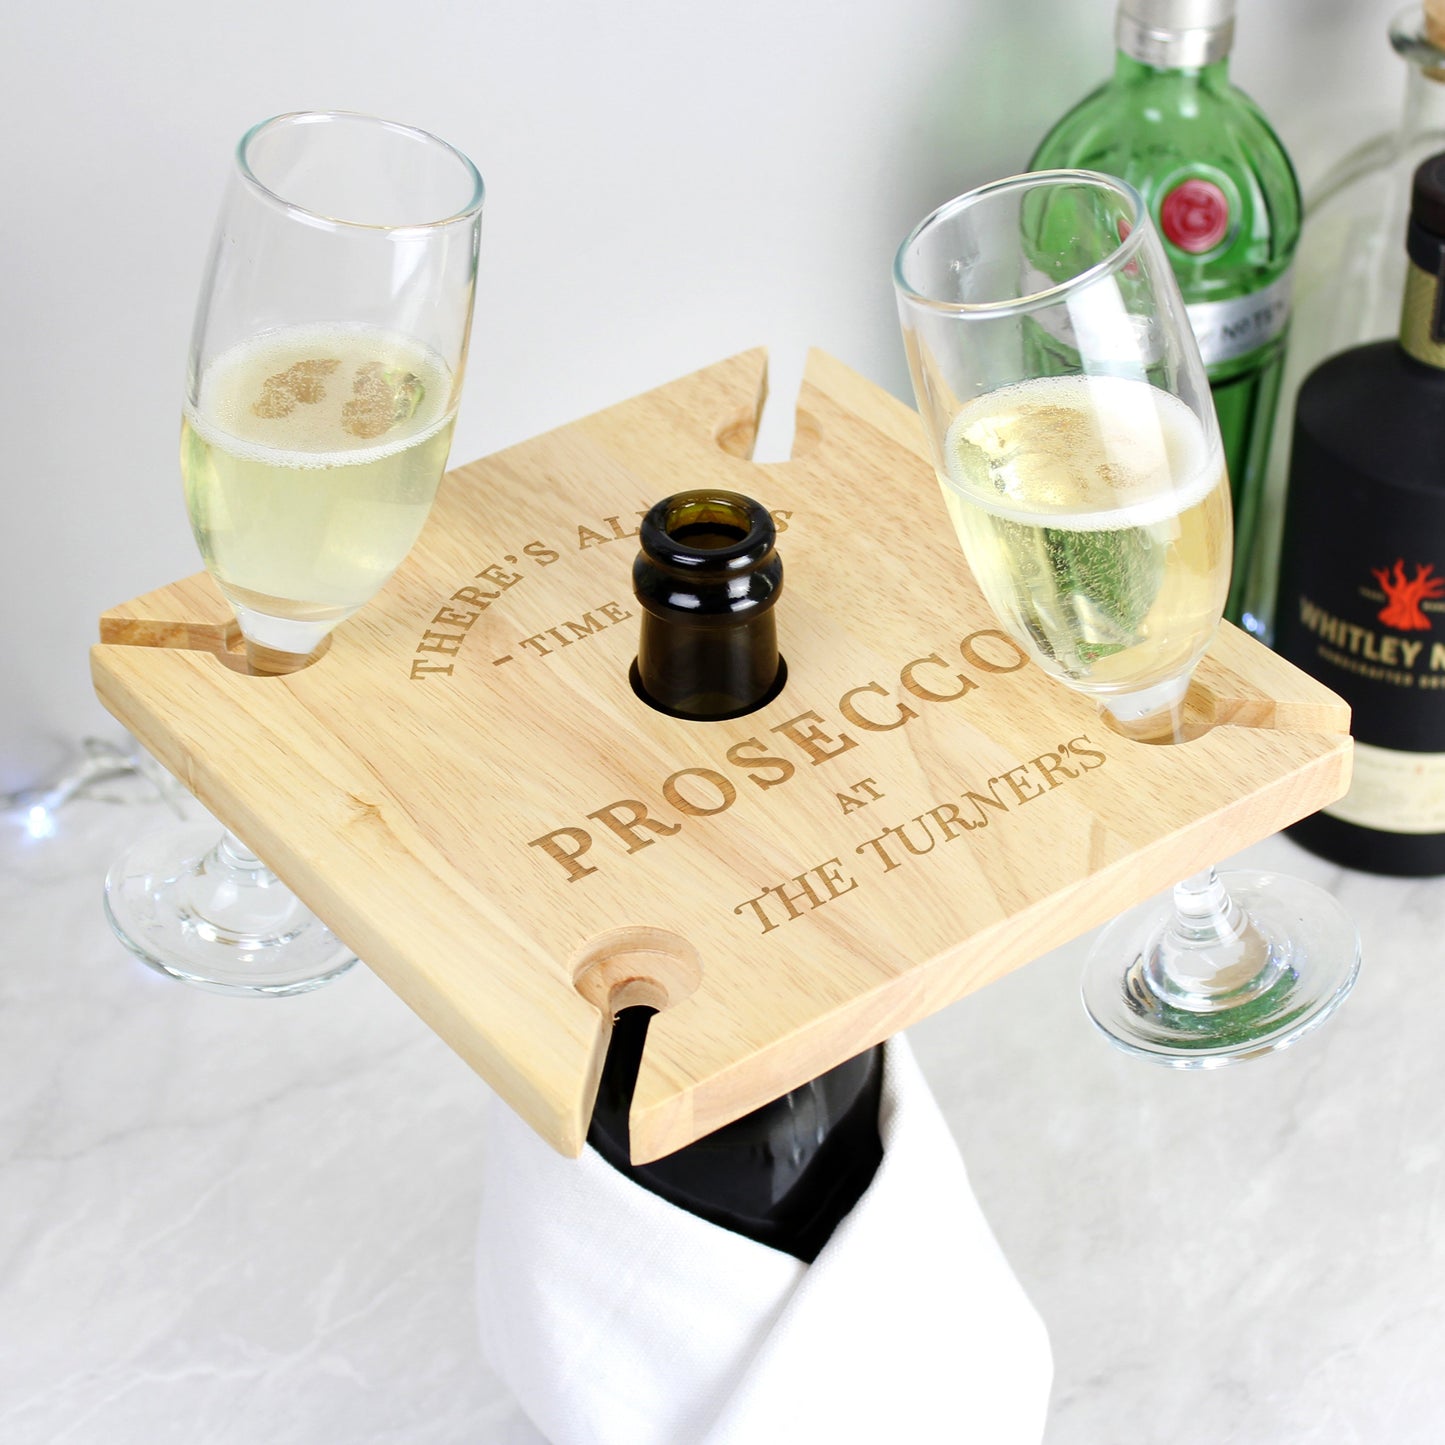 Personalised Prosecco Four Prosecco flute Holder & Bottle Butler-Personalised Gift By Sweetlea Gifts